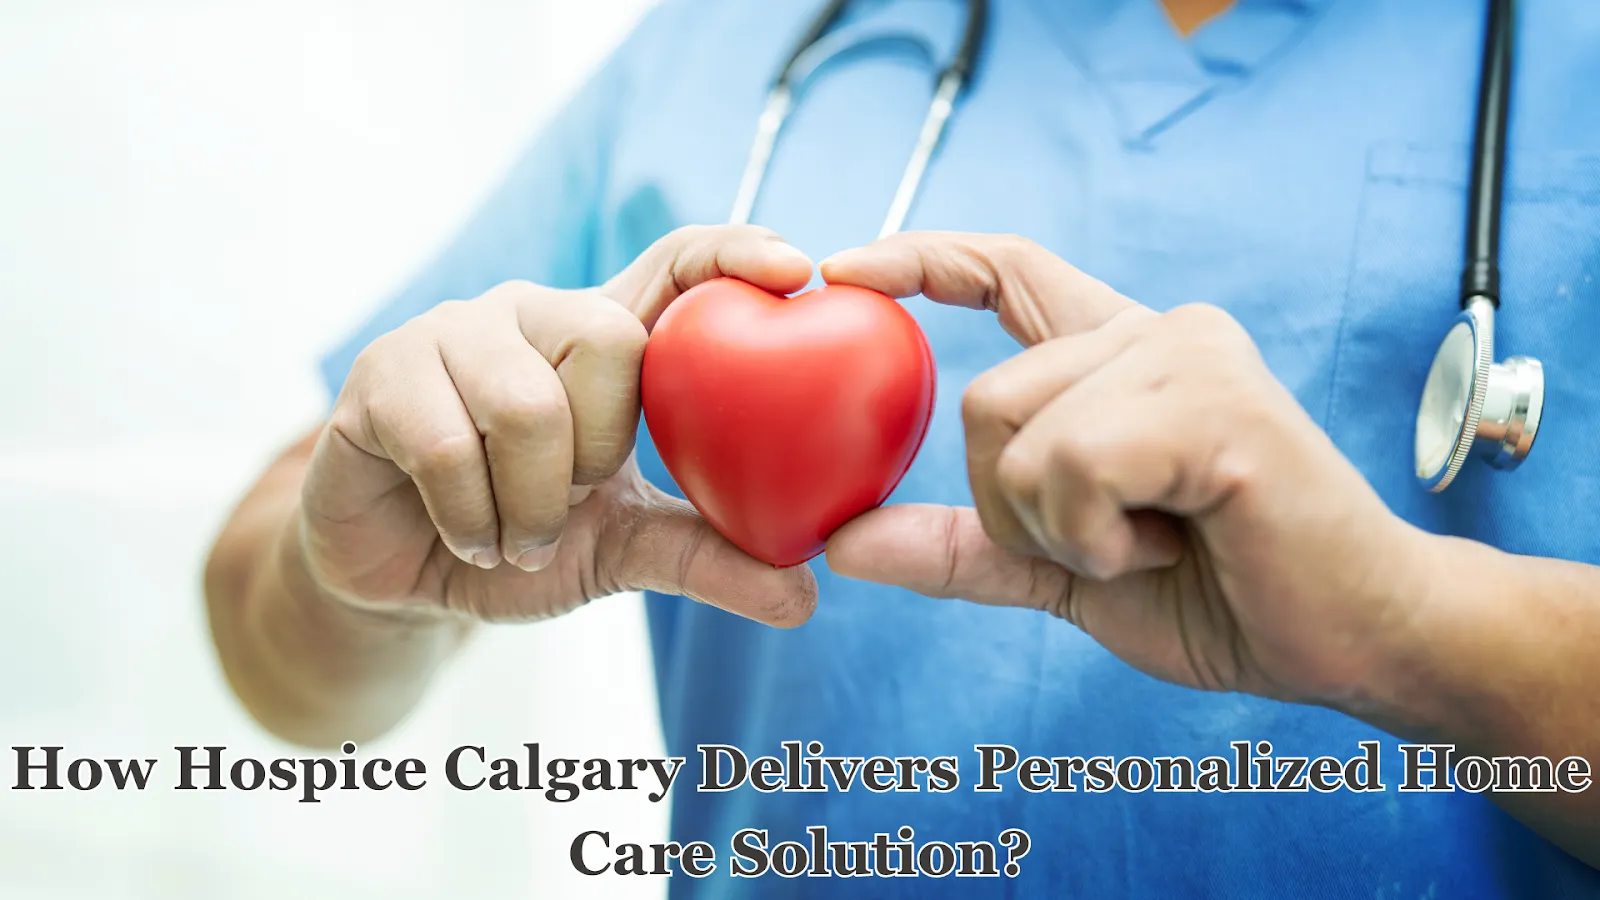 How Hospice Calgary Delivers Personalized Home Care Solution?